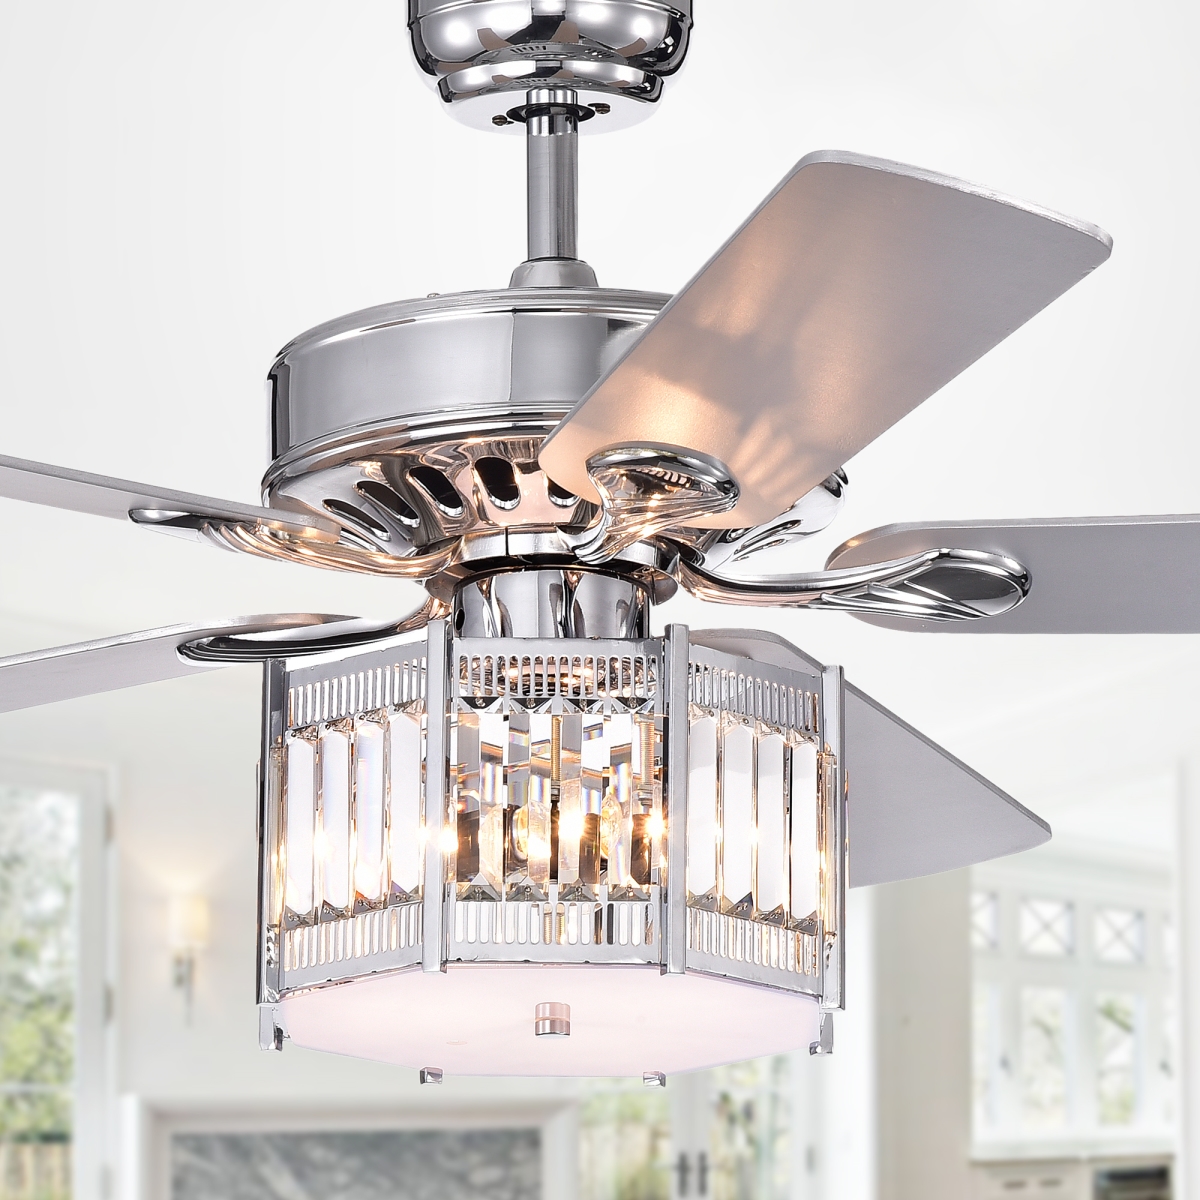 Cfl-8417remo-ch 52 In. Valens 5-blade Lighted Ceiling Fan With Octogon Shade, Chrome